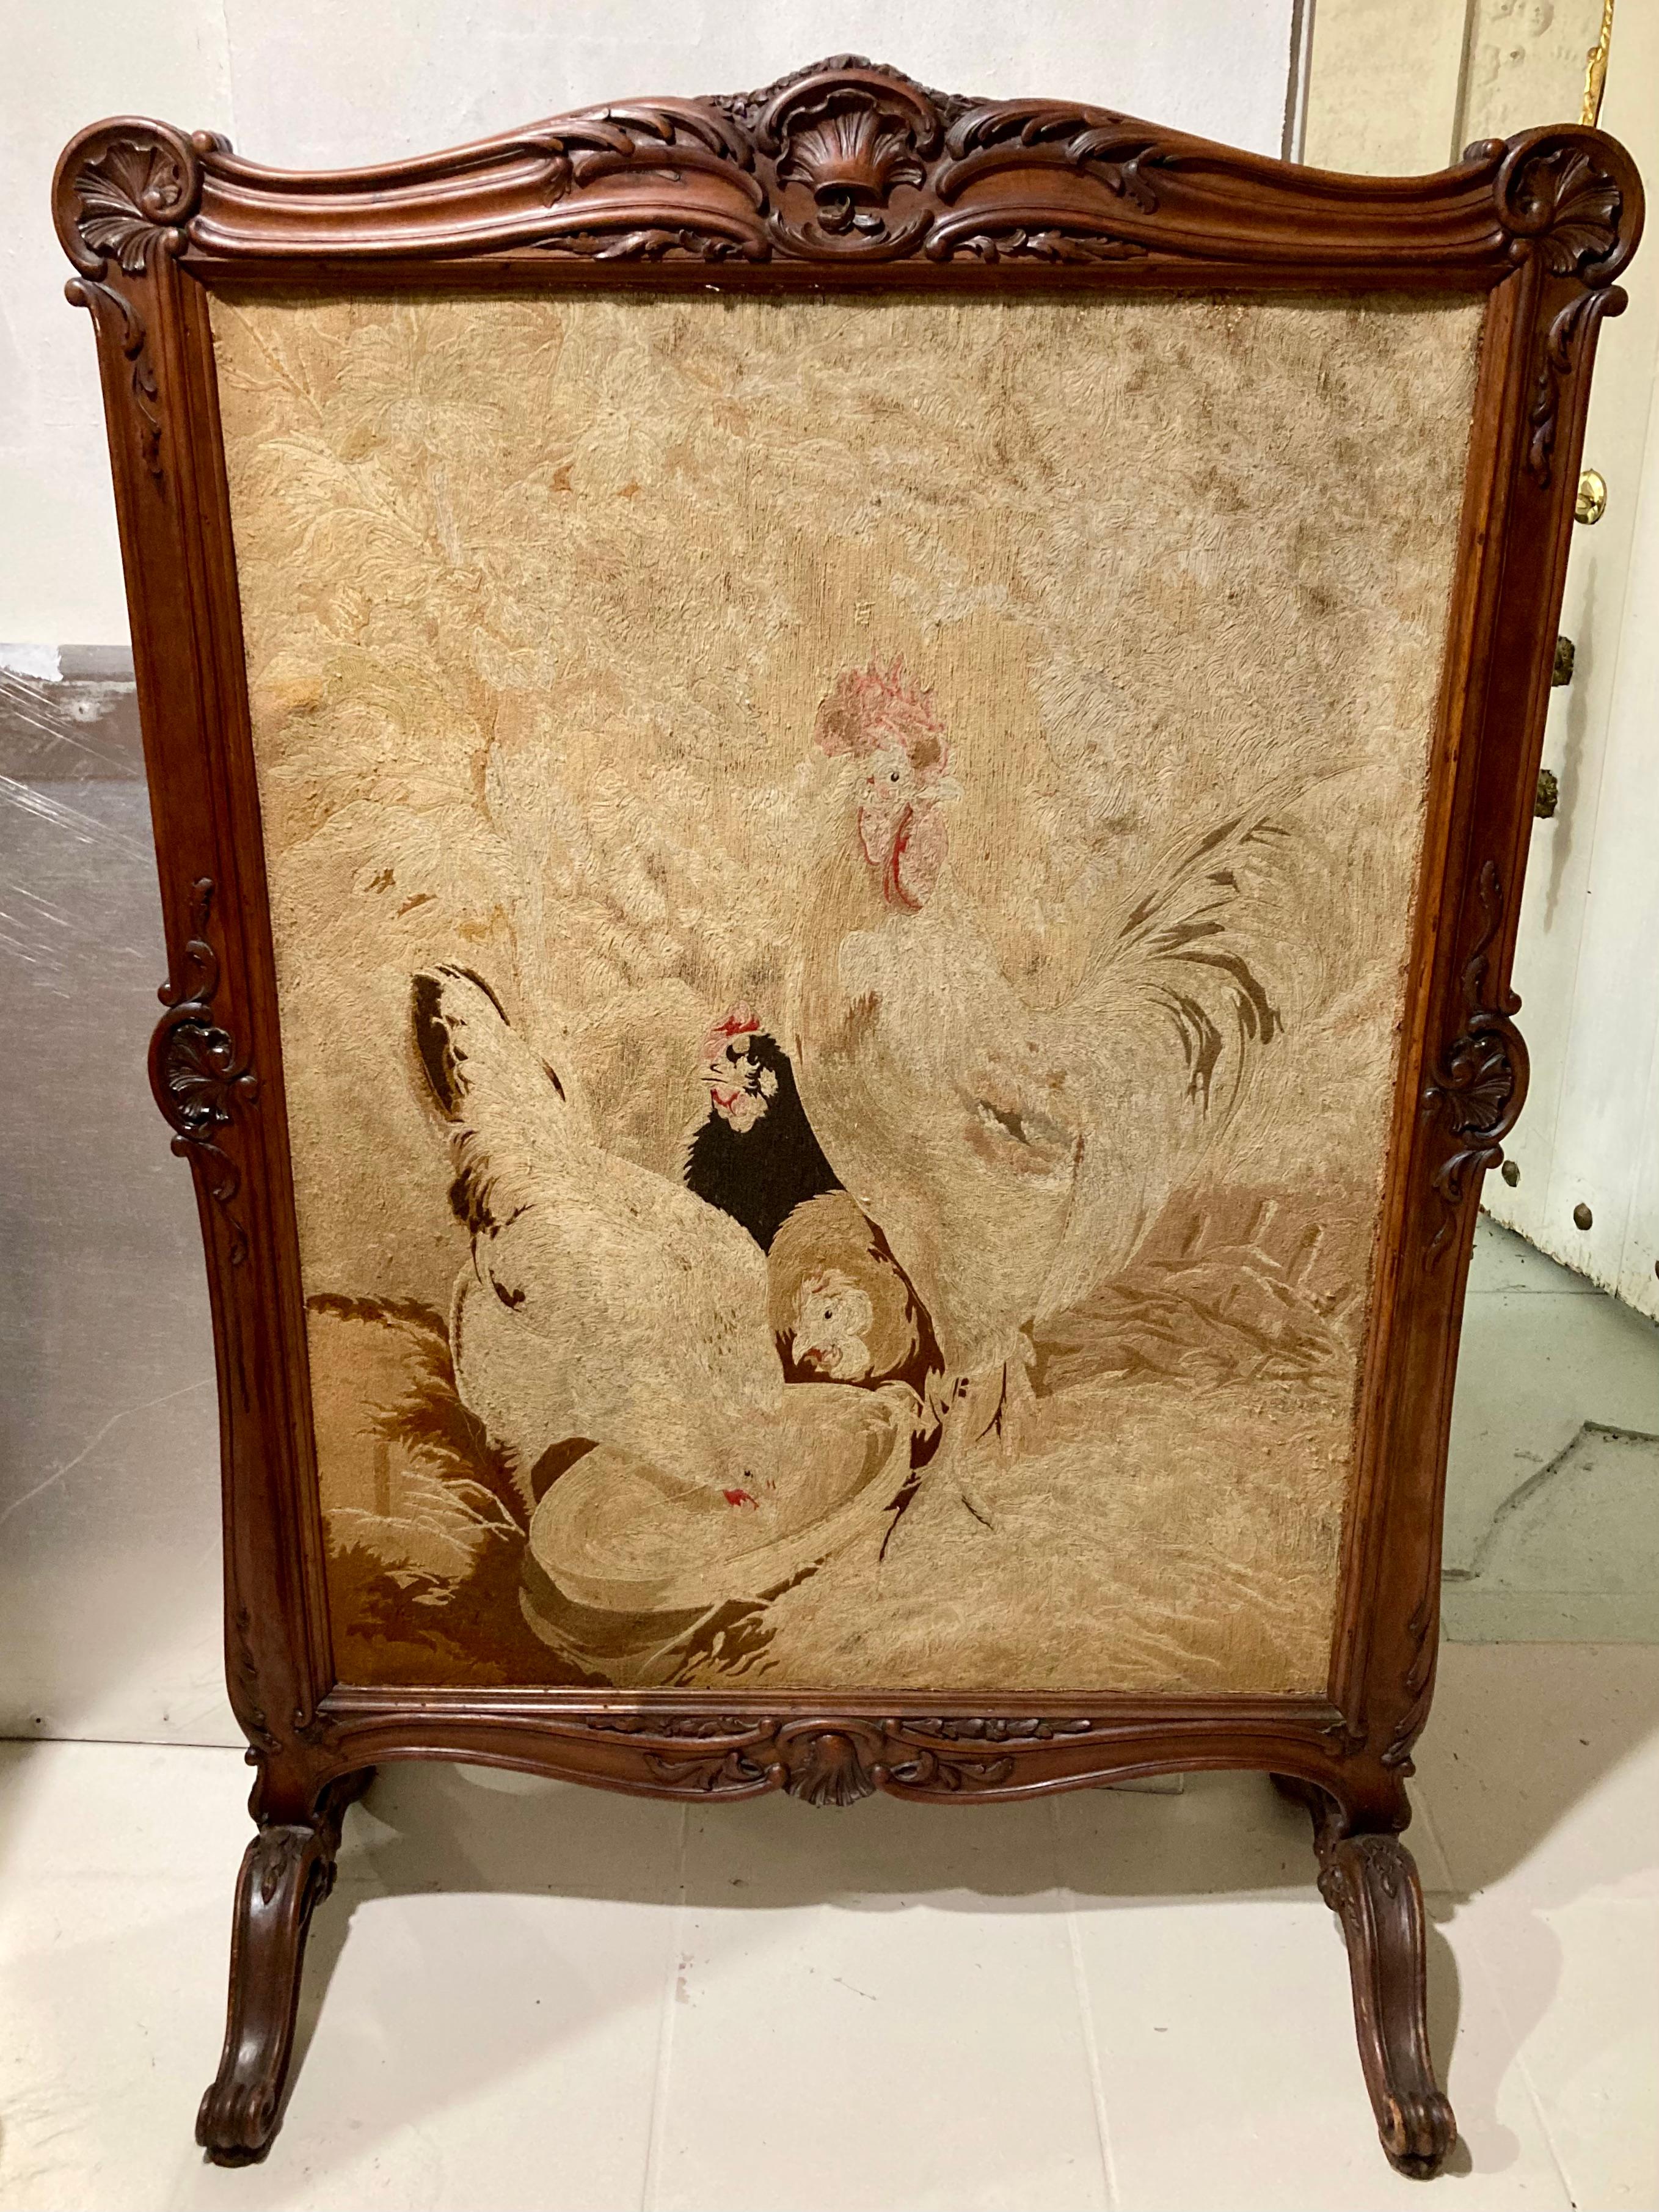 Beautiful French Louis XV palace size fire screen with embroidered rooster and hen motif. Amazing scale and hand carved wood details. Original finish and original textiles. Beautiful embroidery work. Add some French style to your home.